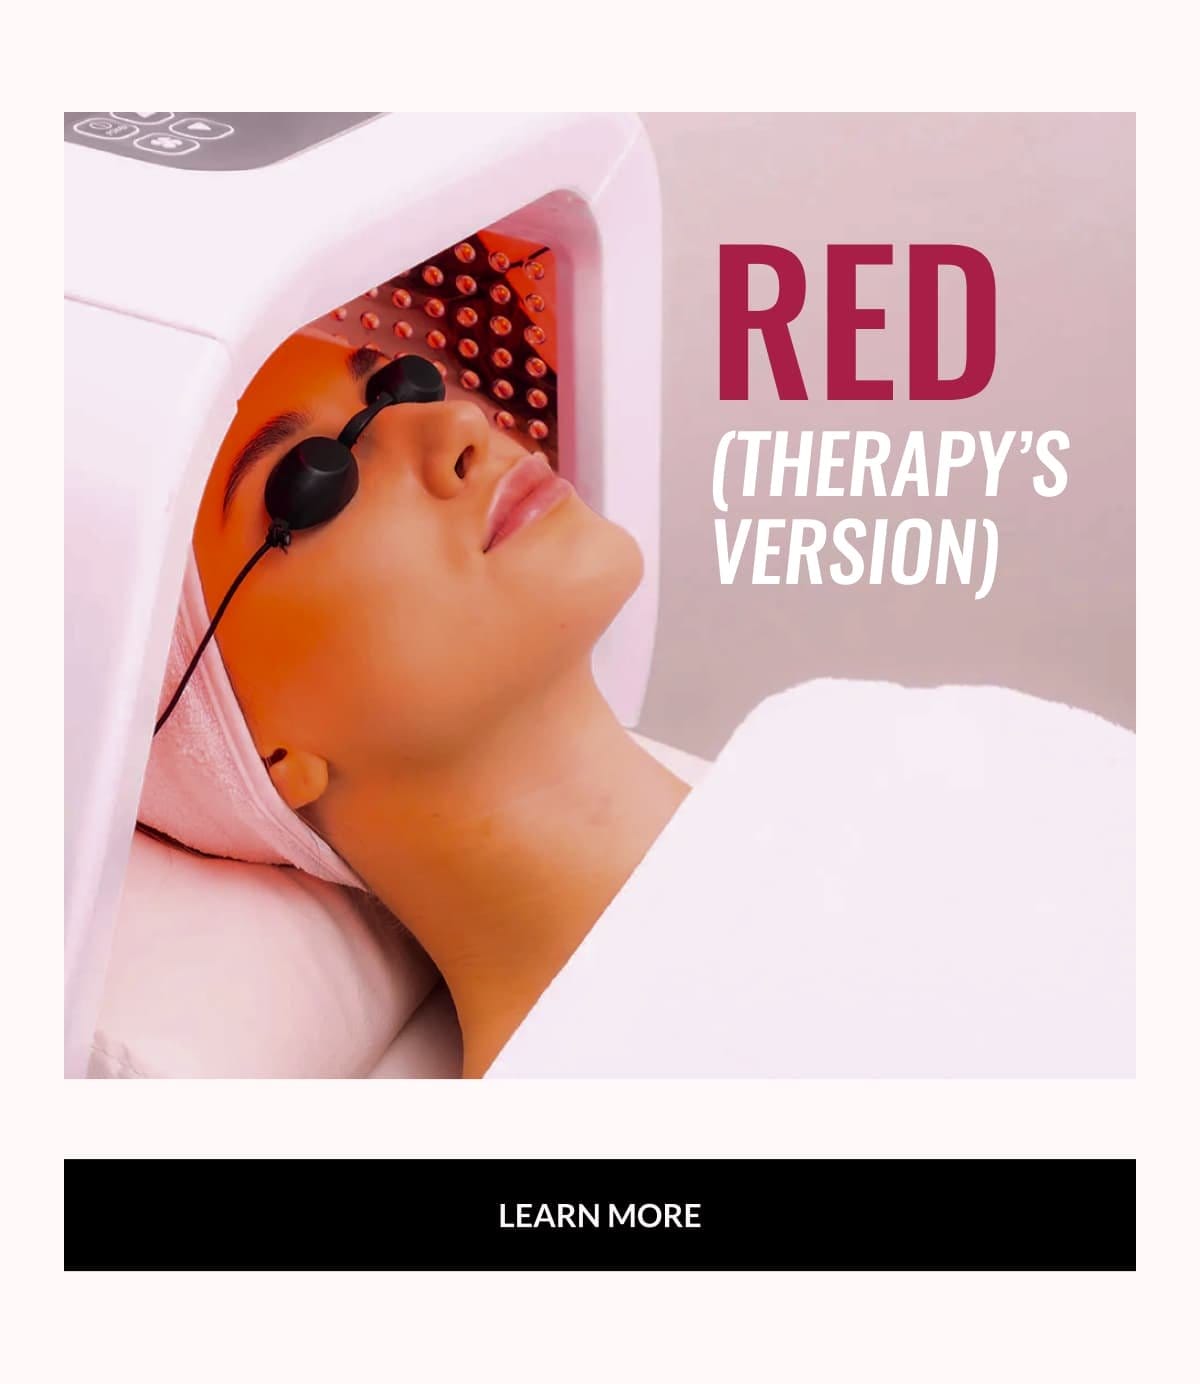 RED (Therapy's Version)